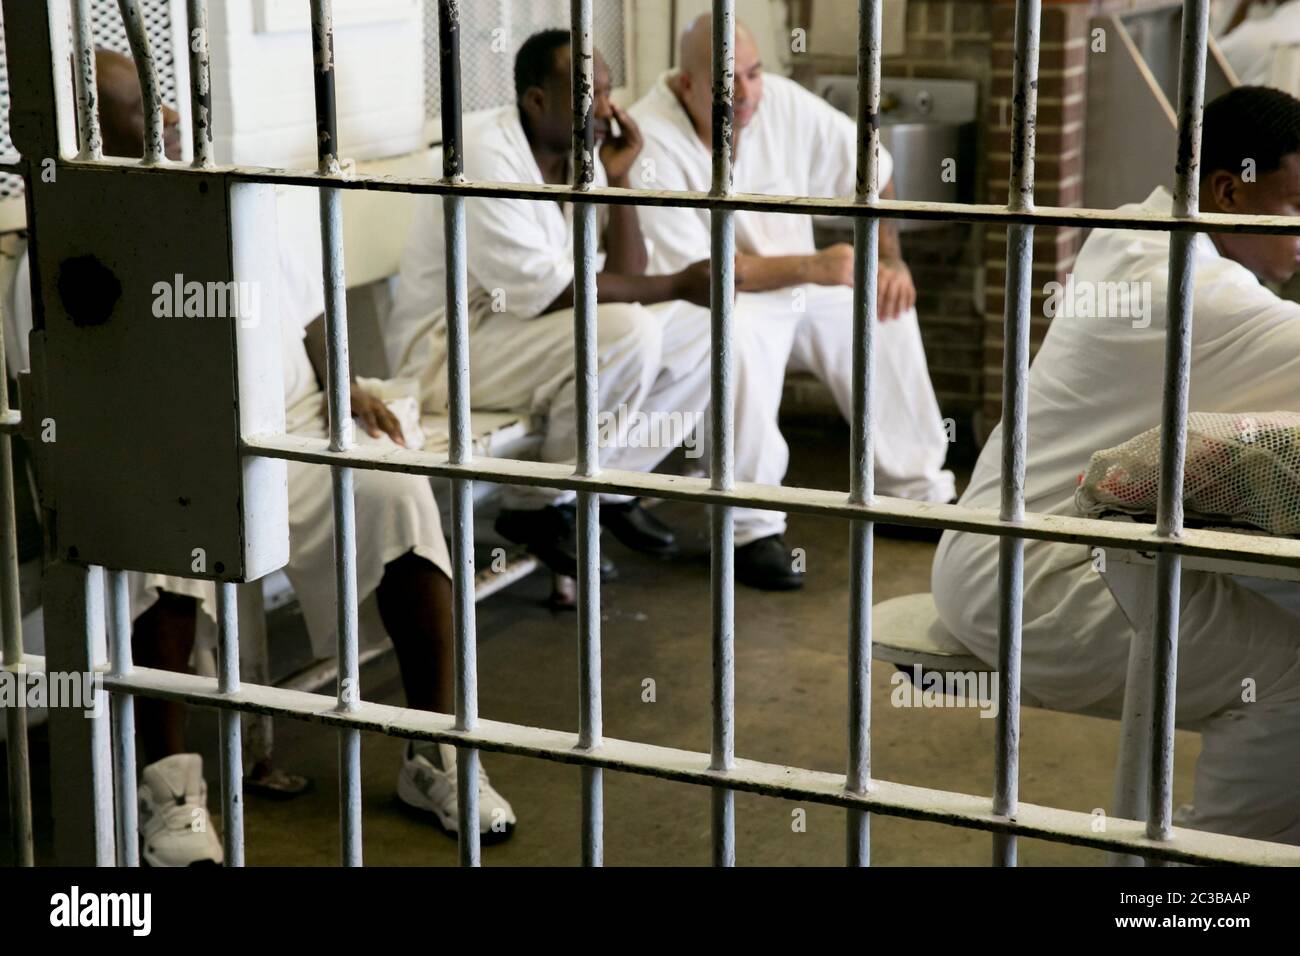 Rosharon Texas USA, August 26 2013: Inmates wearing white uniforms gather behind bars in common area where they are allowed to socialize. They are incarcerated in Darrington Prison, a maximum-security unit of the Texas Department of Criminal Justice. ©Marjorie Kamys Cotera/Daemmrich Photography Stock Photo